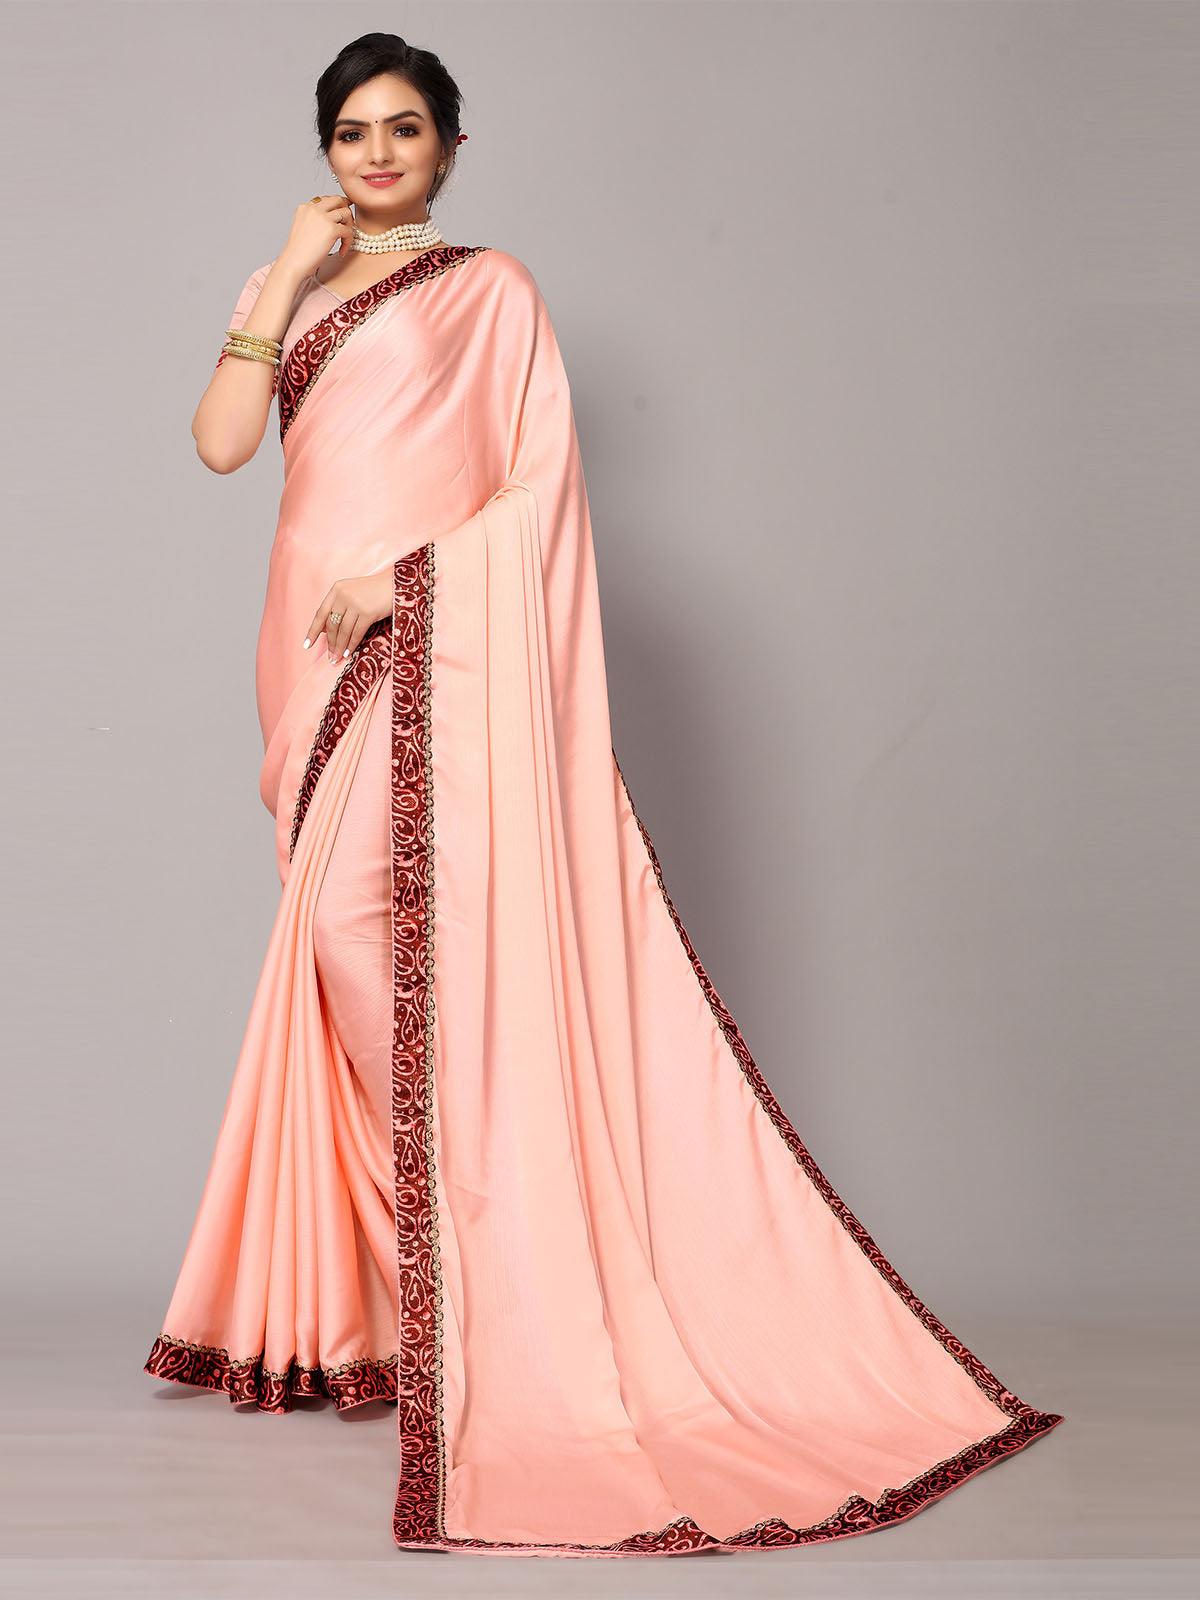 Women's Peach Chiffion Printed Border Saree With Matching Blouse. - Odette